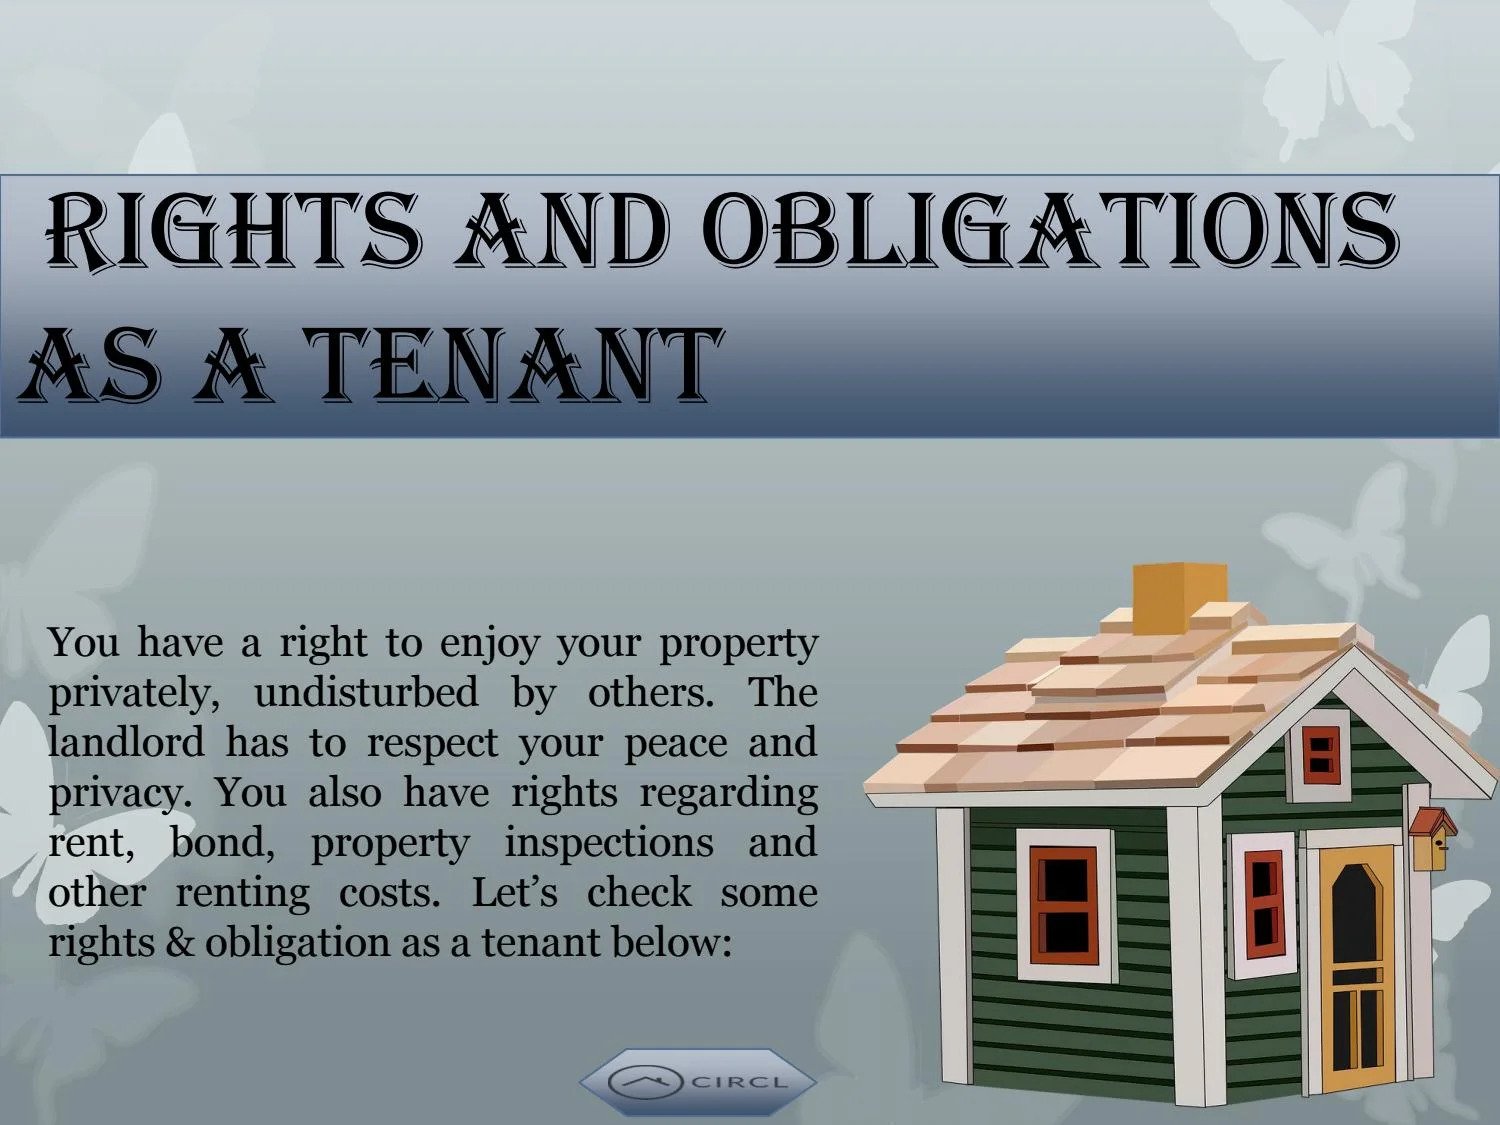 Rights and obligations as a tenant